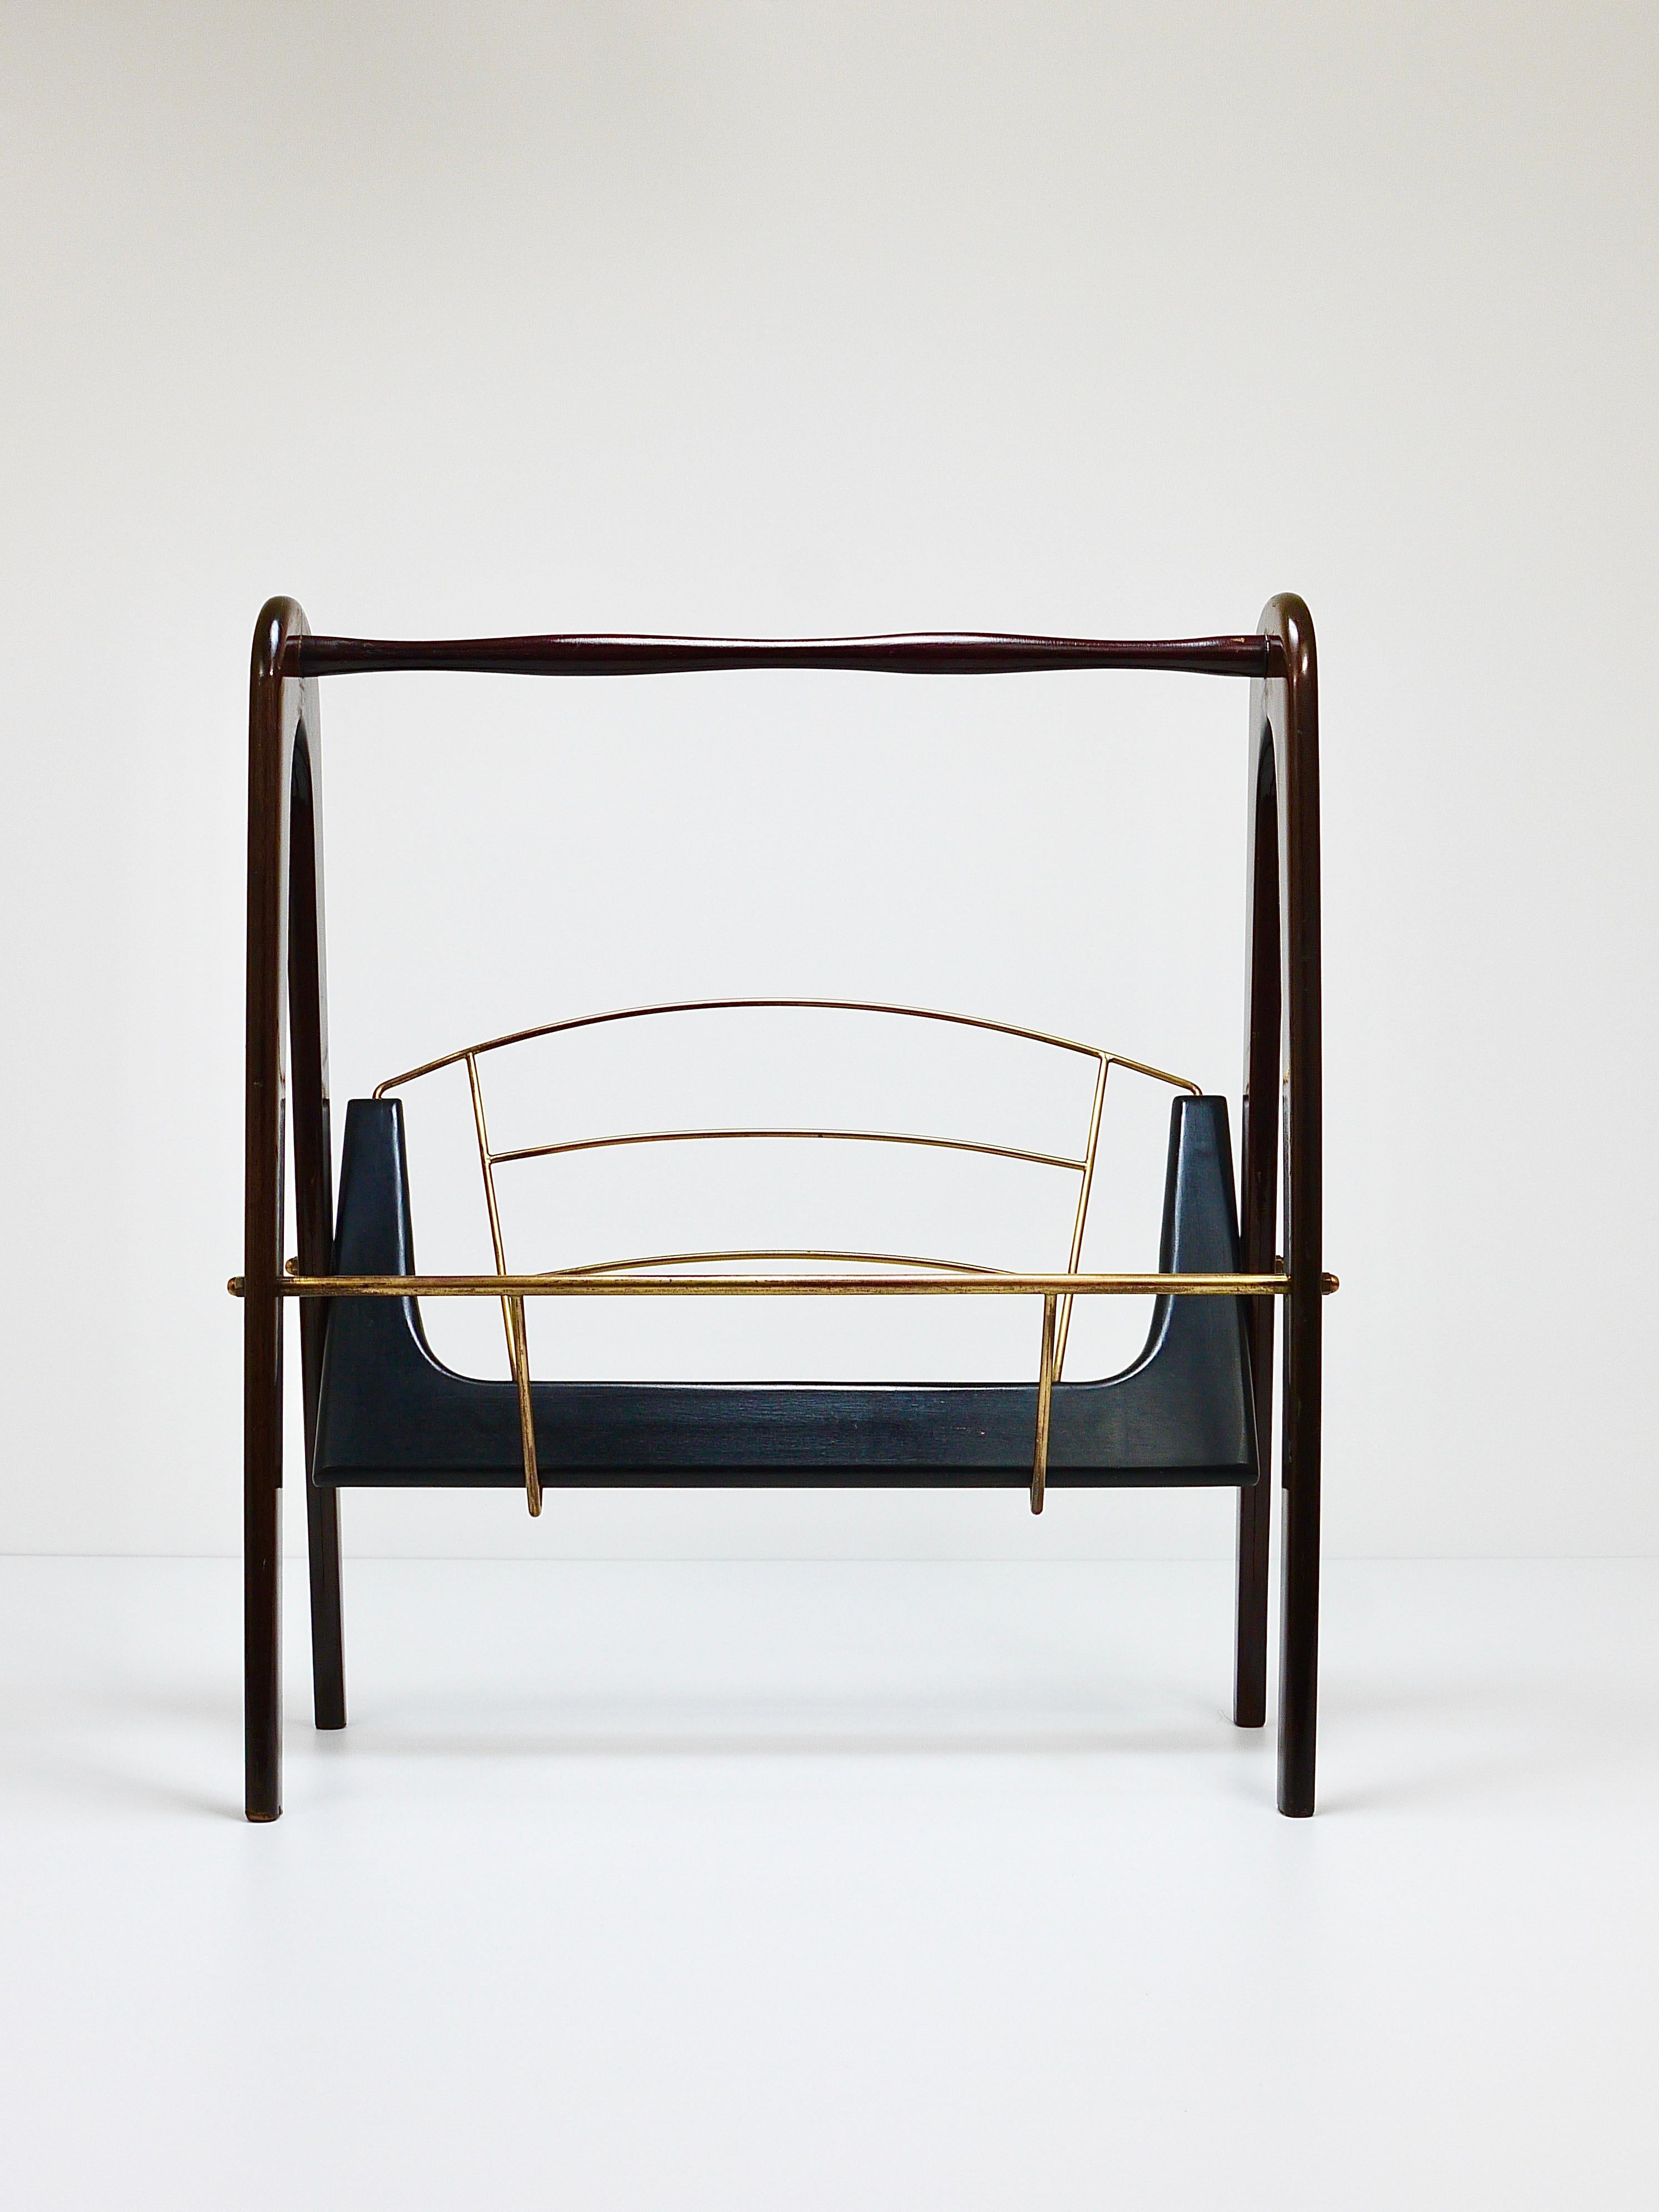 A beautiful and lovely shaped Italian midcentury newspaper stand / magazine rack from the 1950s by Cesare Lacca. Made of mahogany and black wood with nice brass details. In good condition with charming age-related patina. In the style of Ico Parisi.